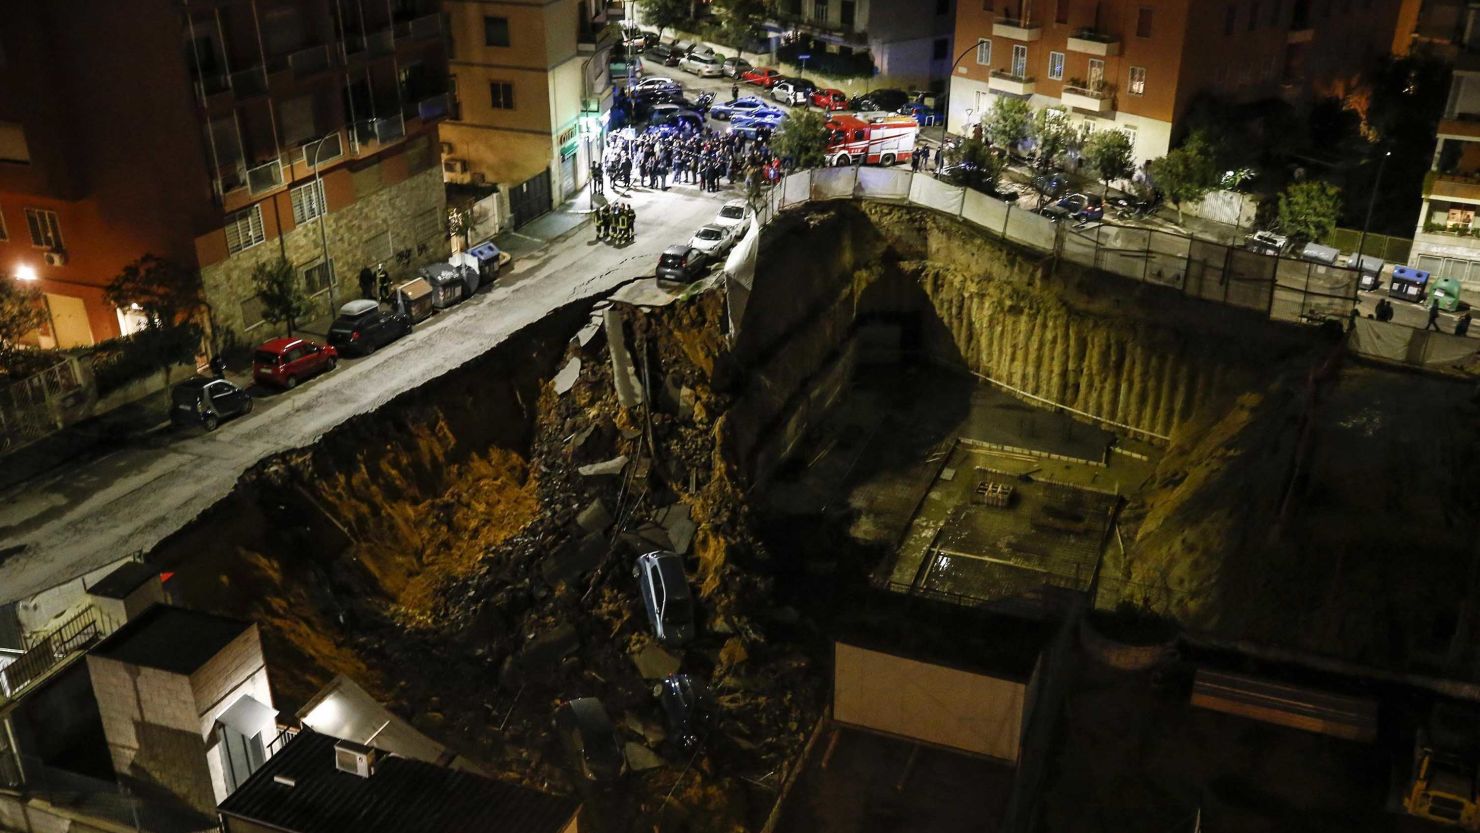 A view of a large sinkhole that opened in a street of a residential area in Rome on Wednesday.